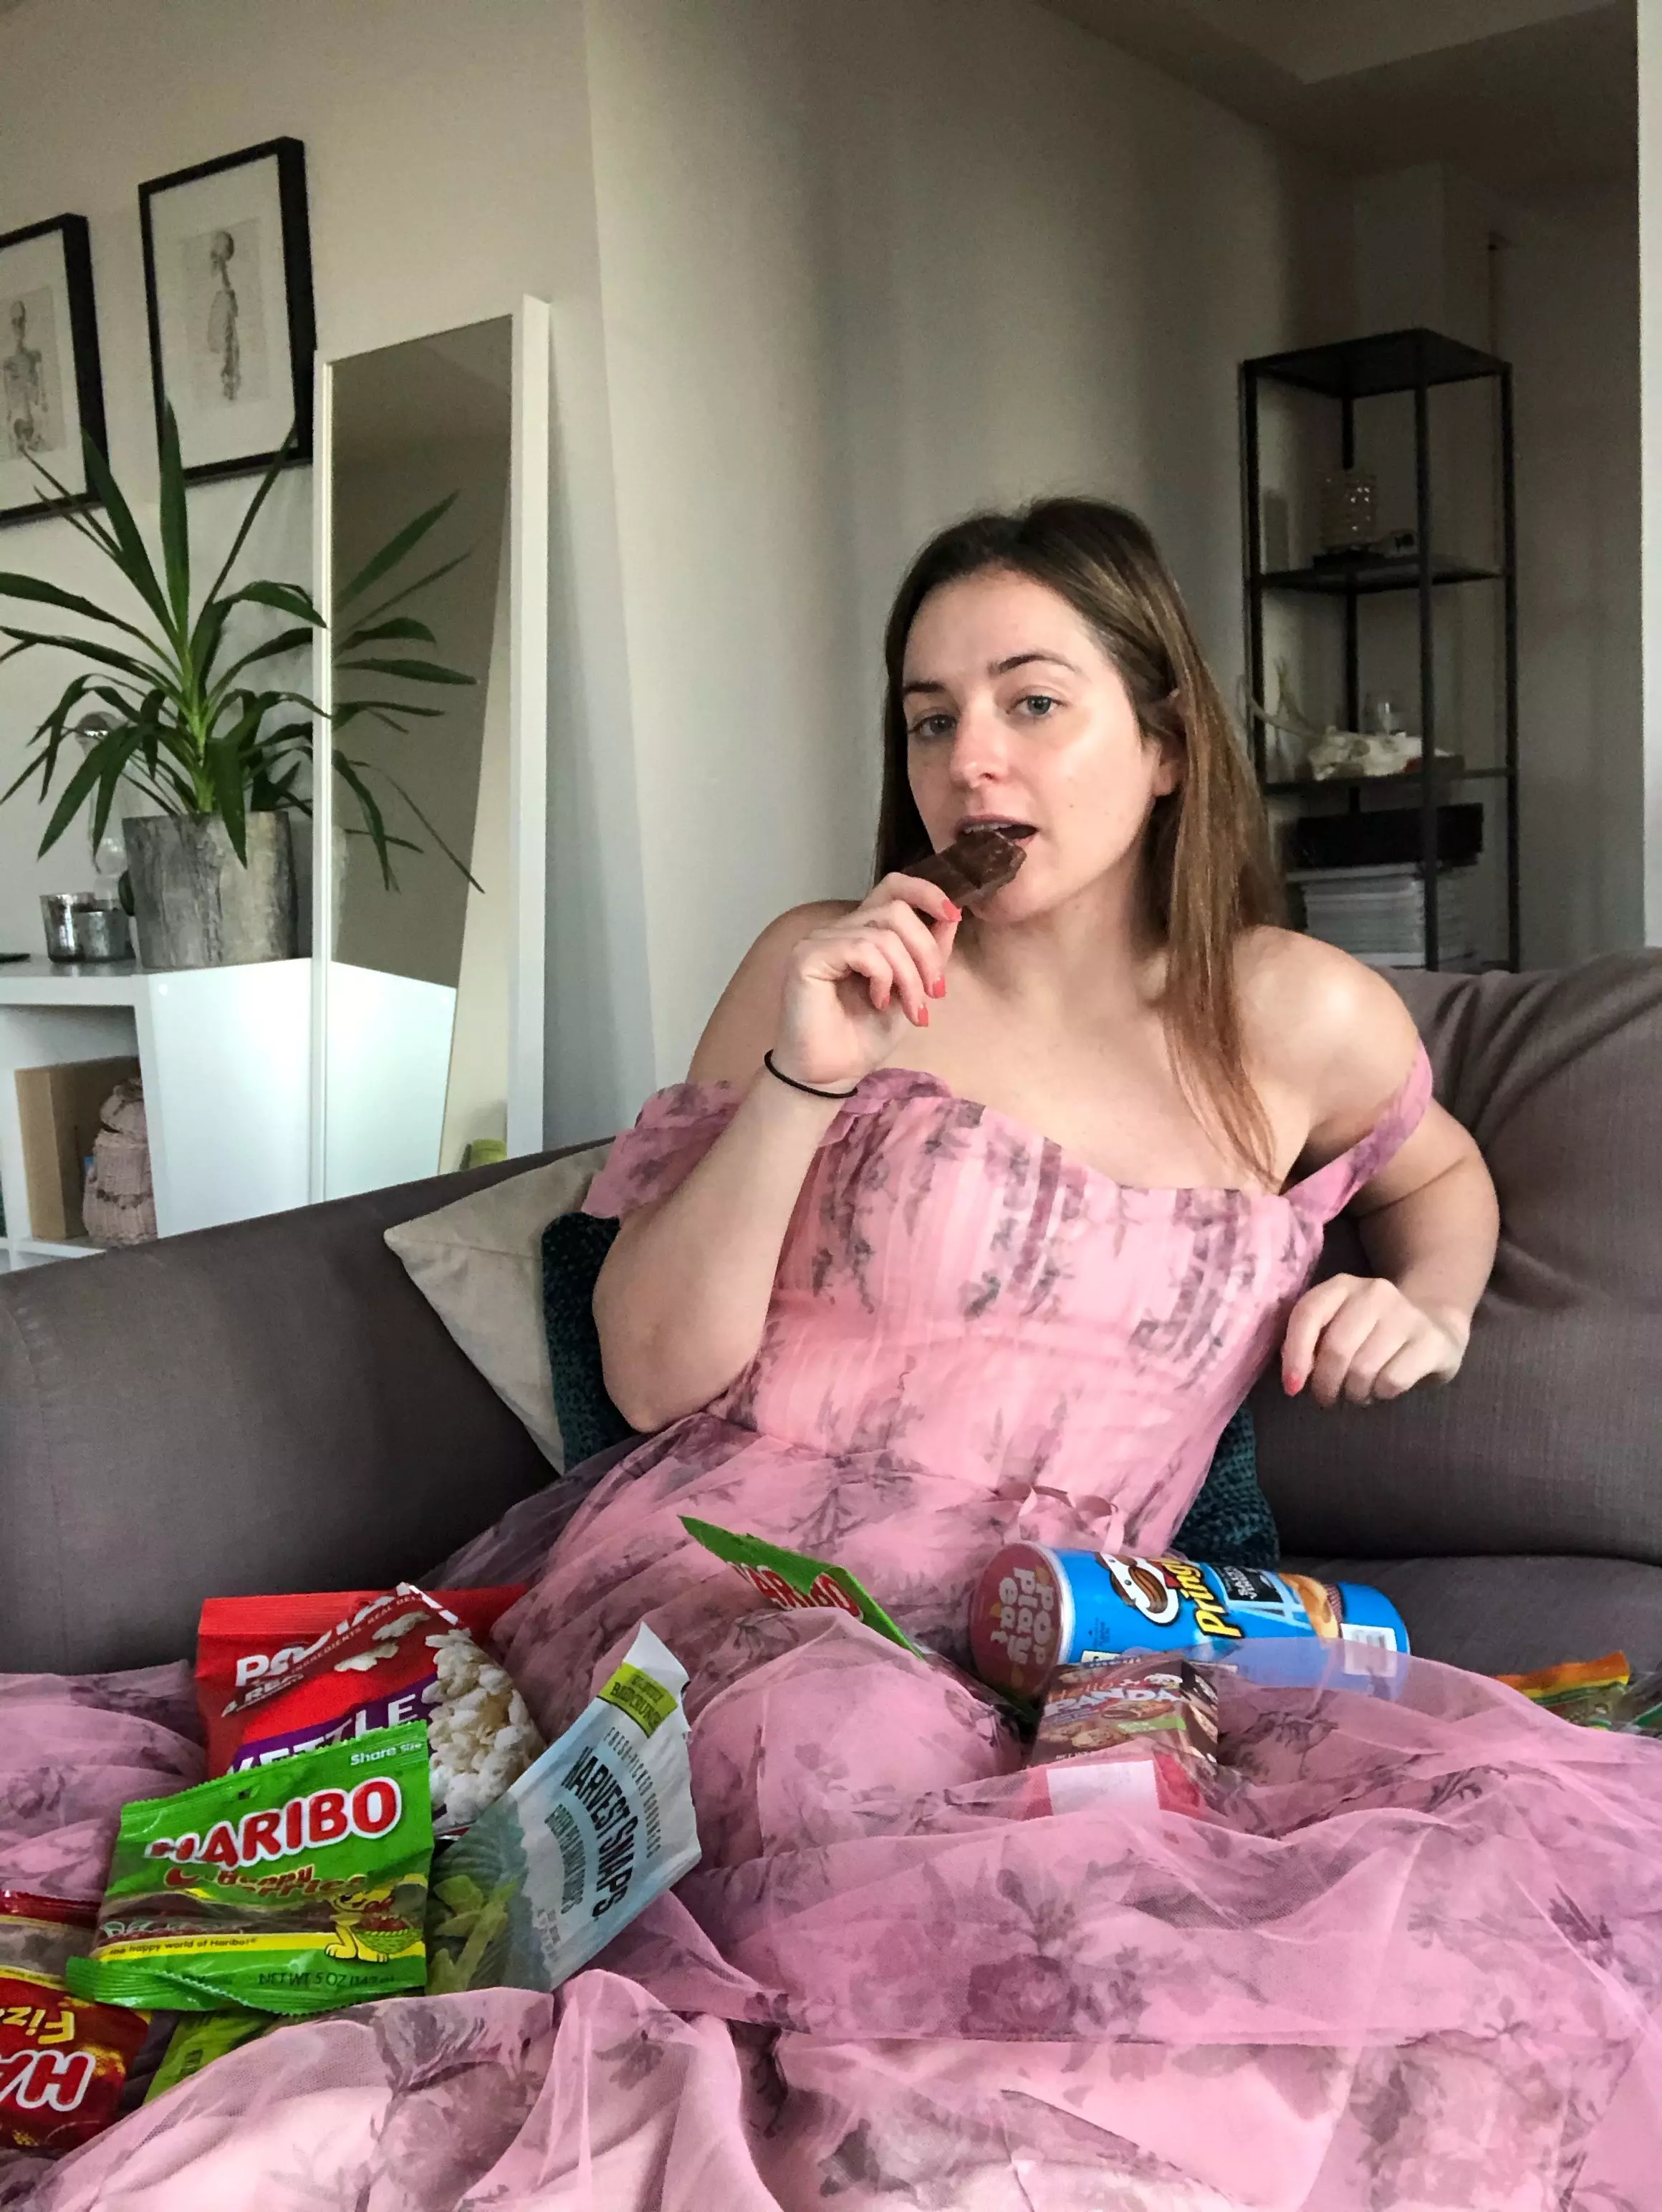 For Lucy, snacking attire is a maxi dress (